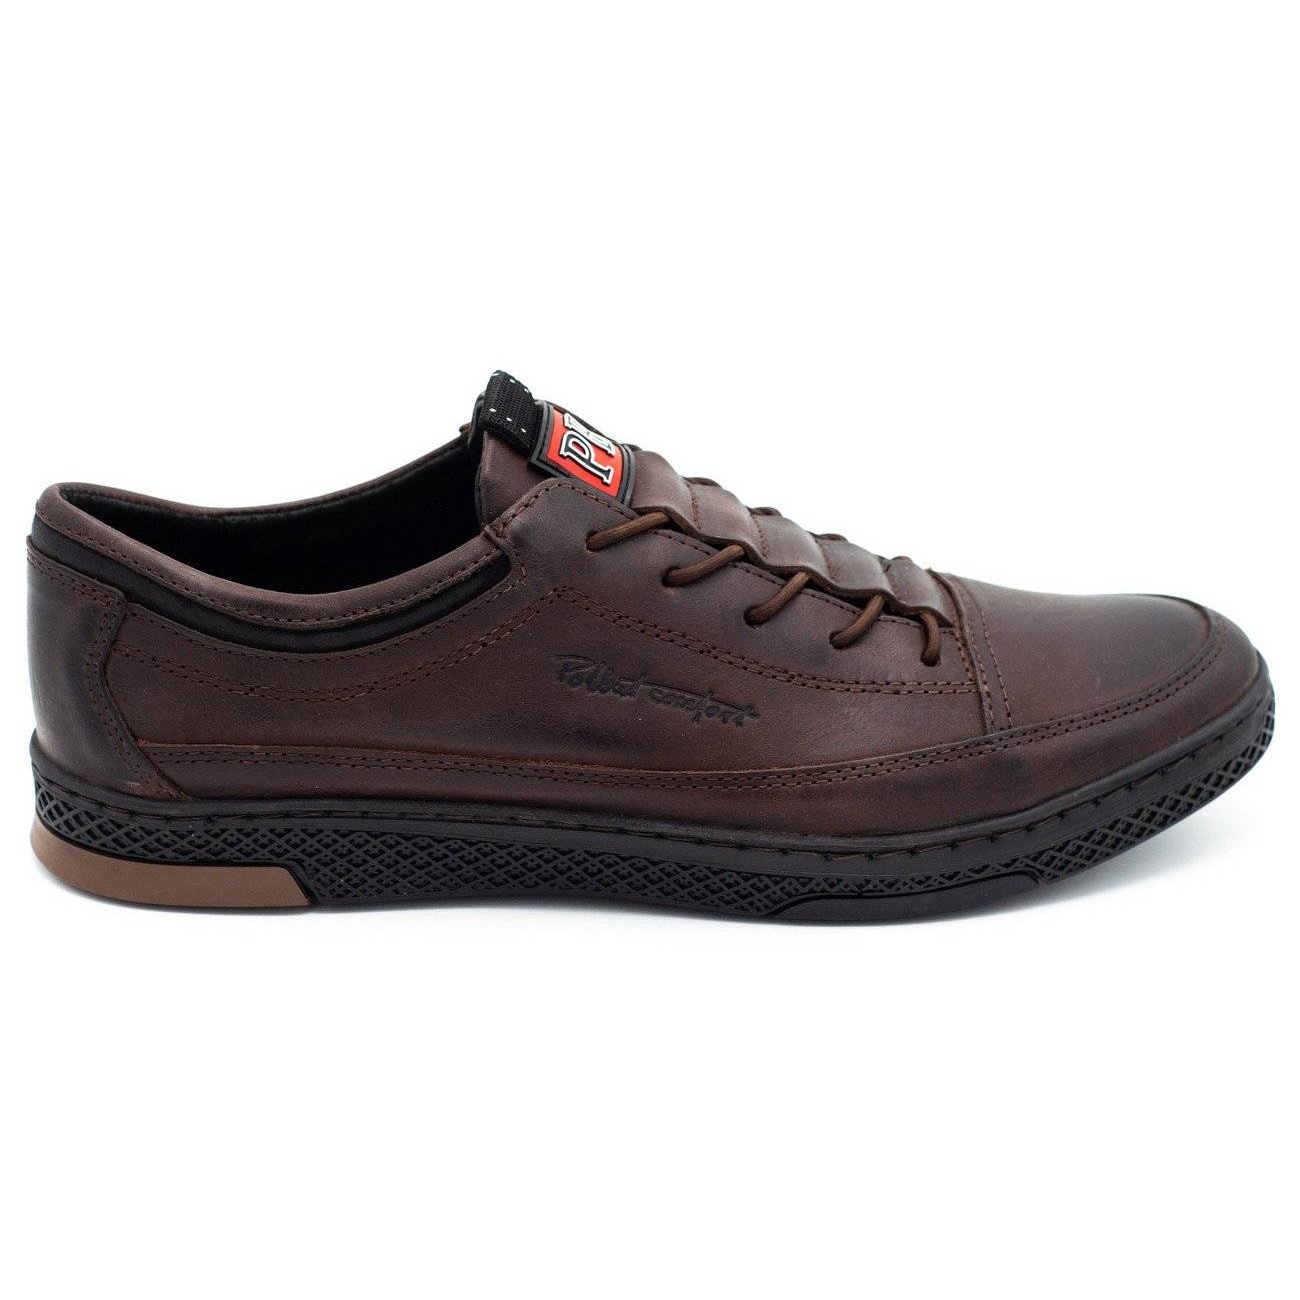 Discover more than 275 leather casual sneakers latest